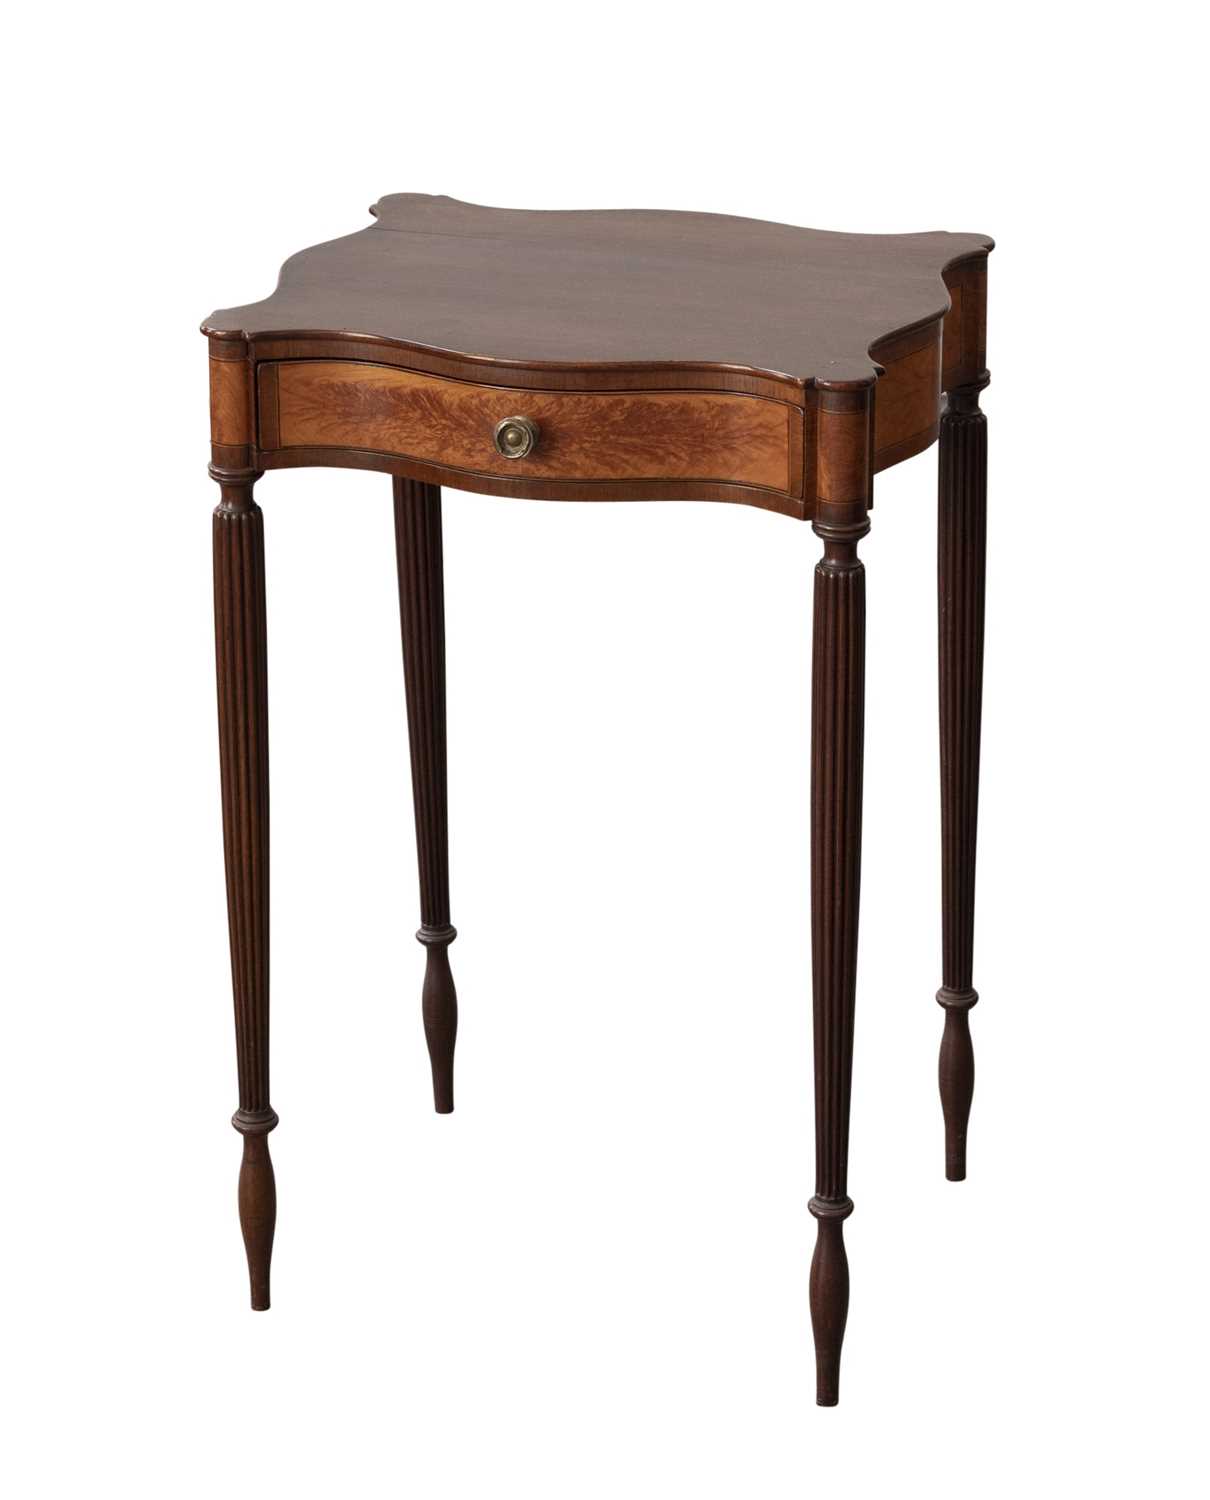 Lot 1066 - Federal Inlaid Mahogany Serpentine One-drawer Stand